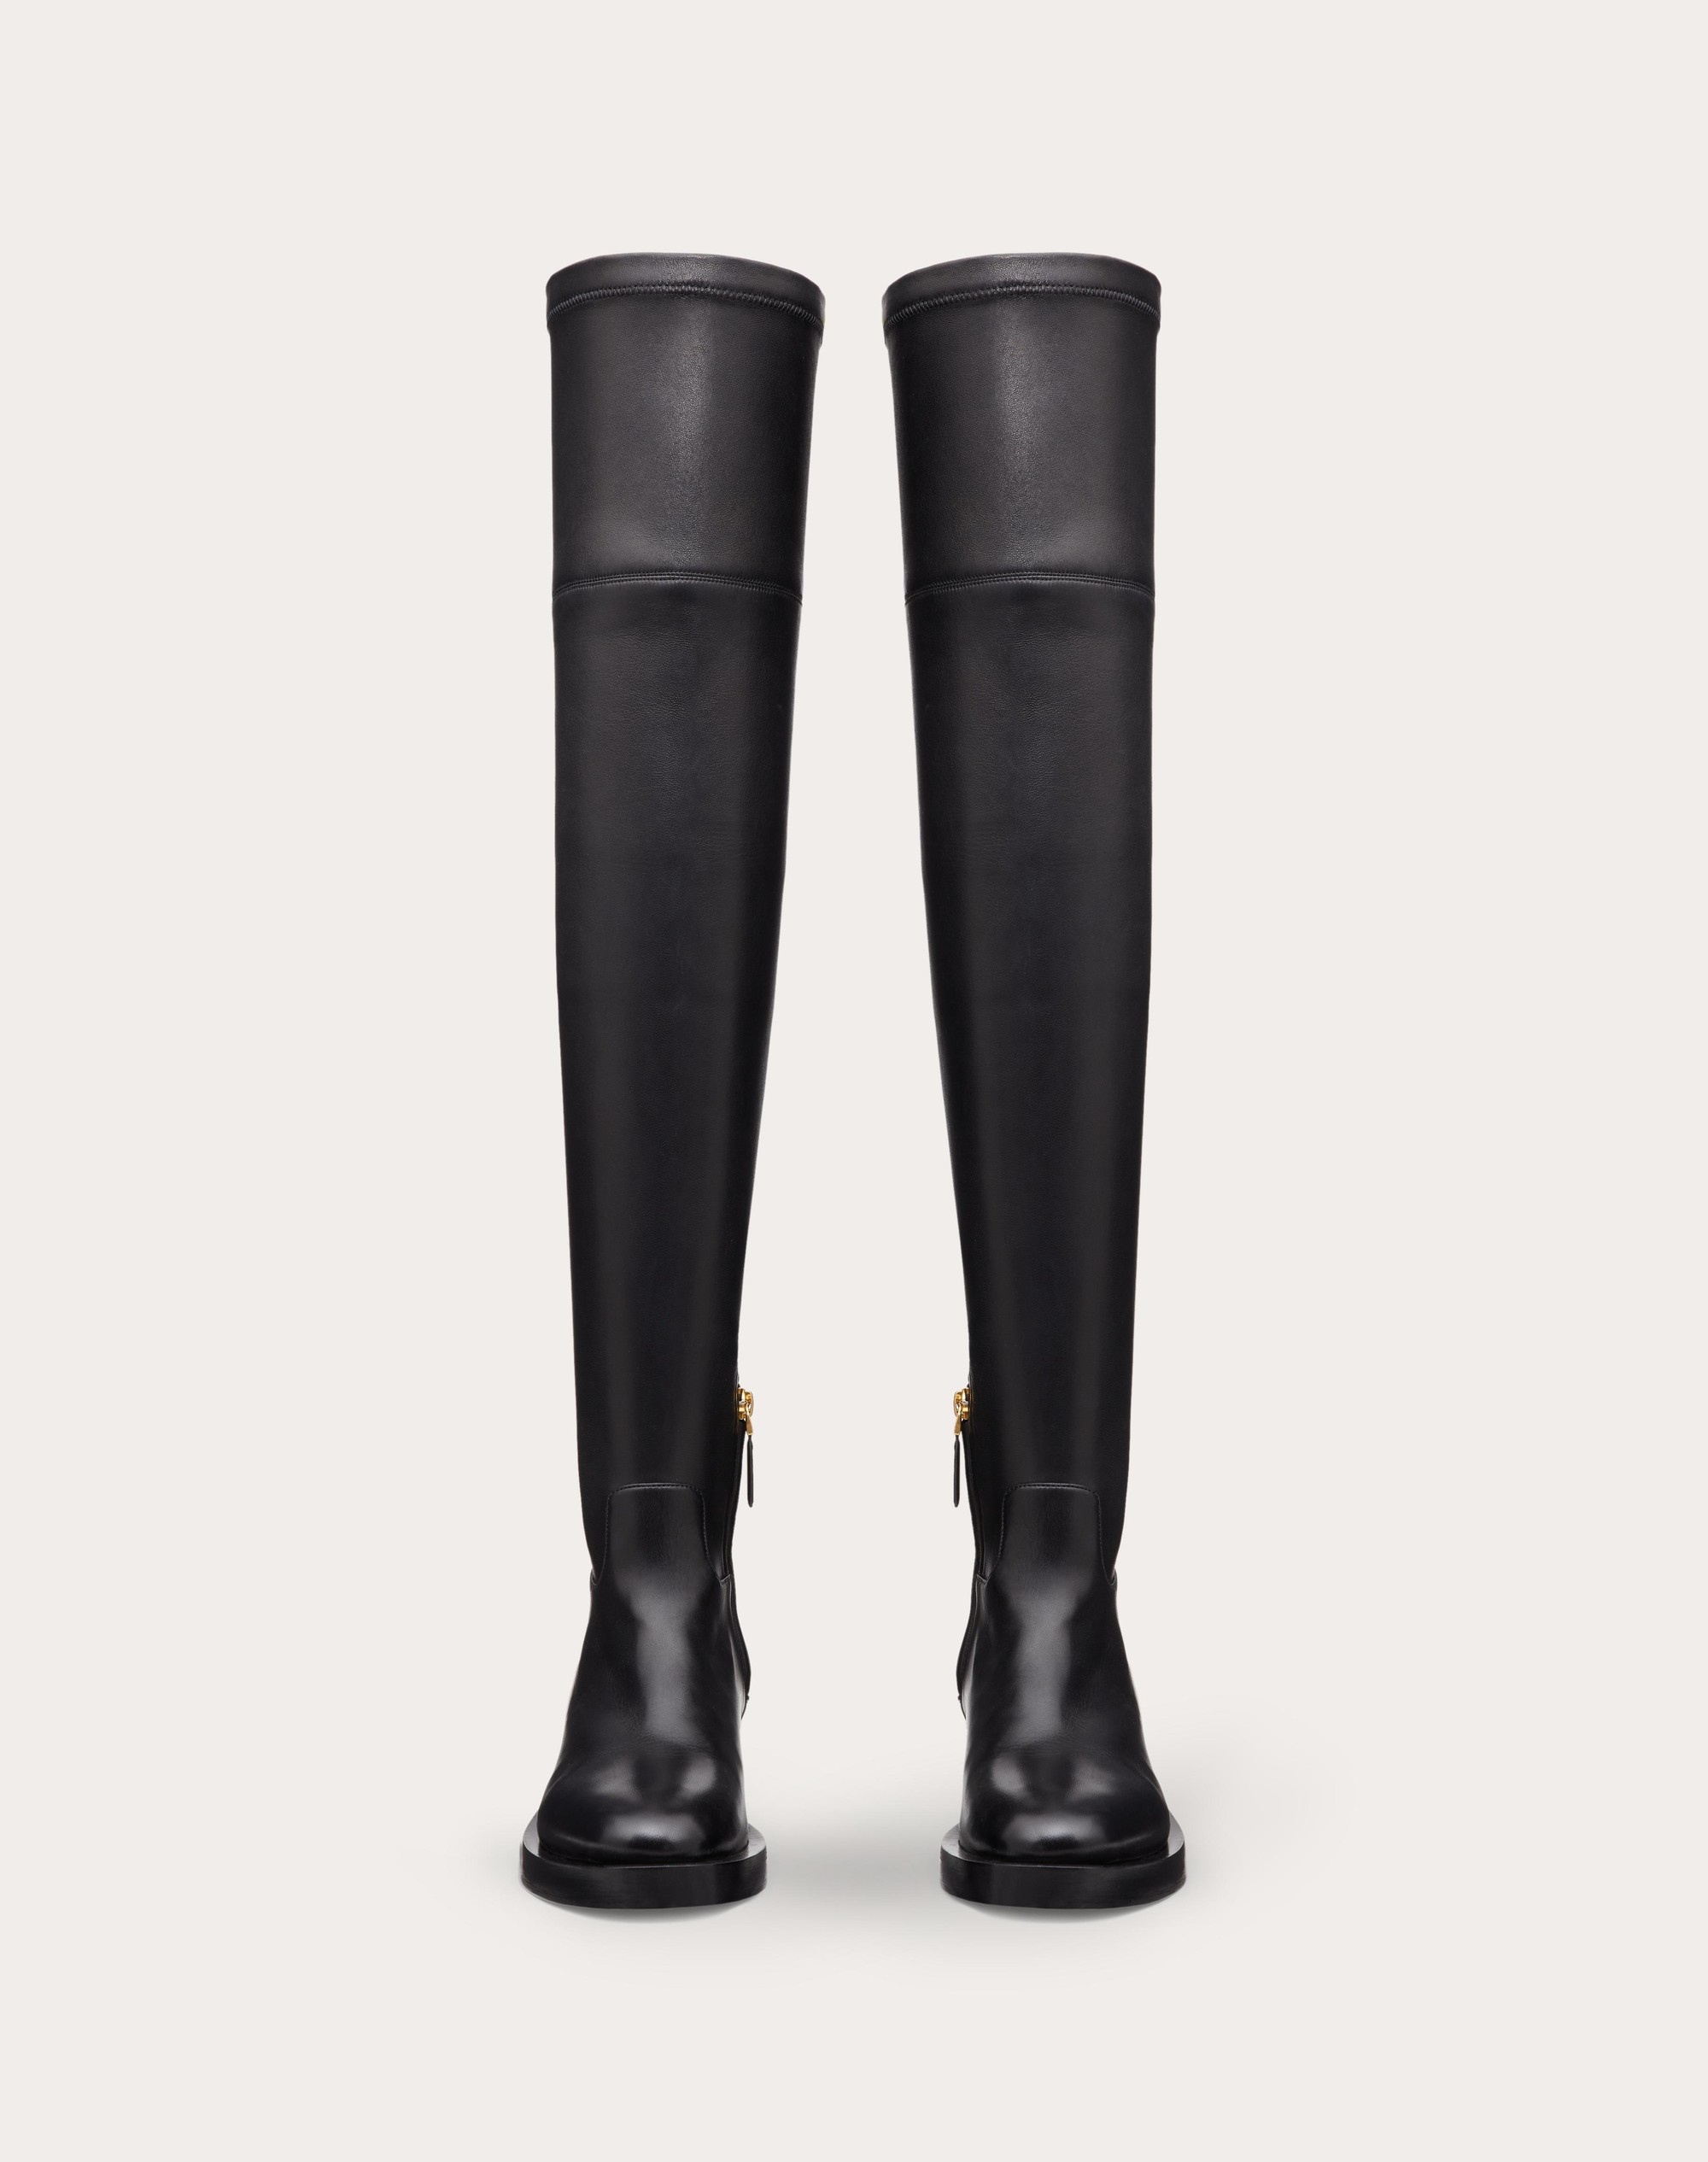 ROMAN STUD STRETCH NAPPA OVER-THE-KNEE BOOT 30MM - 4